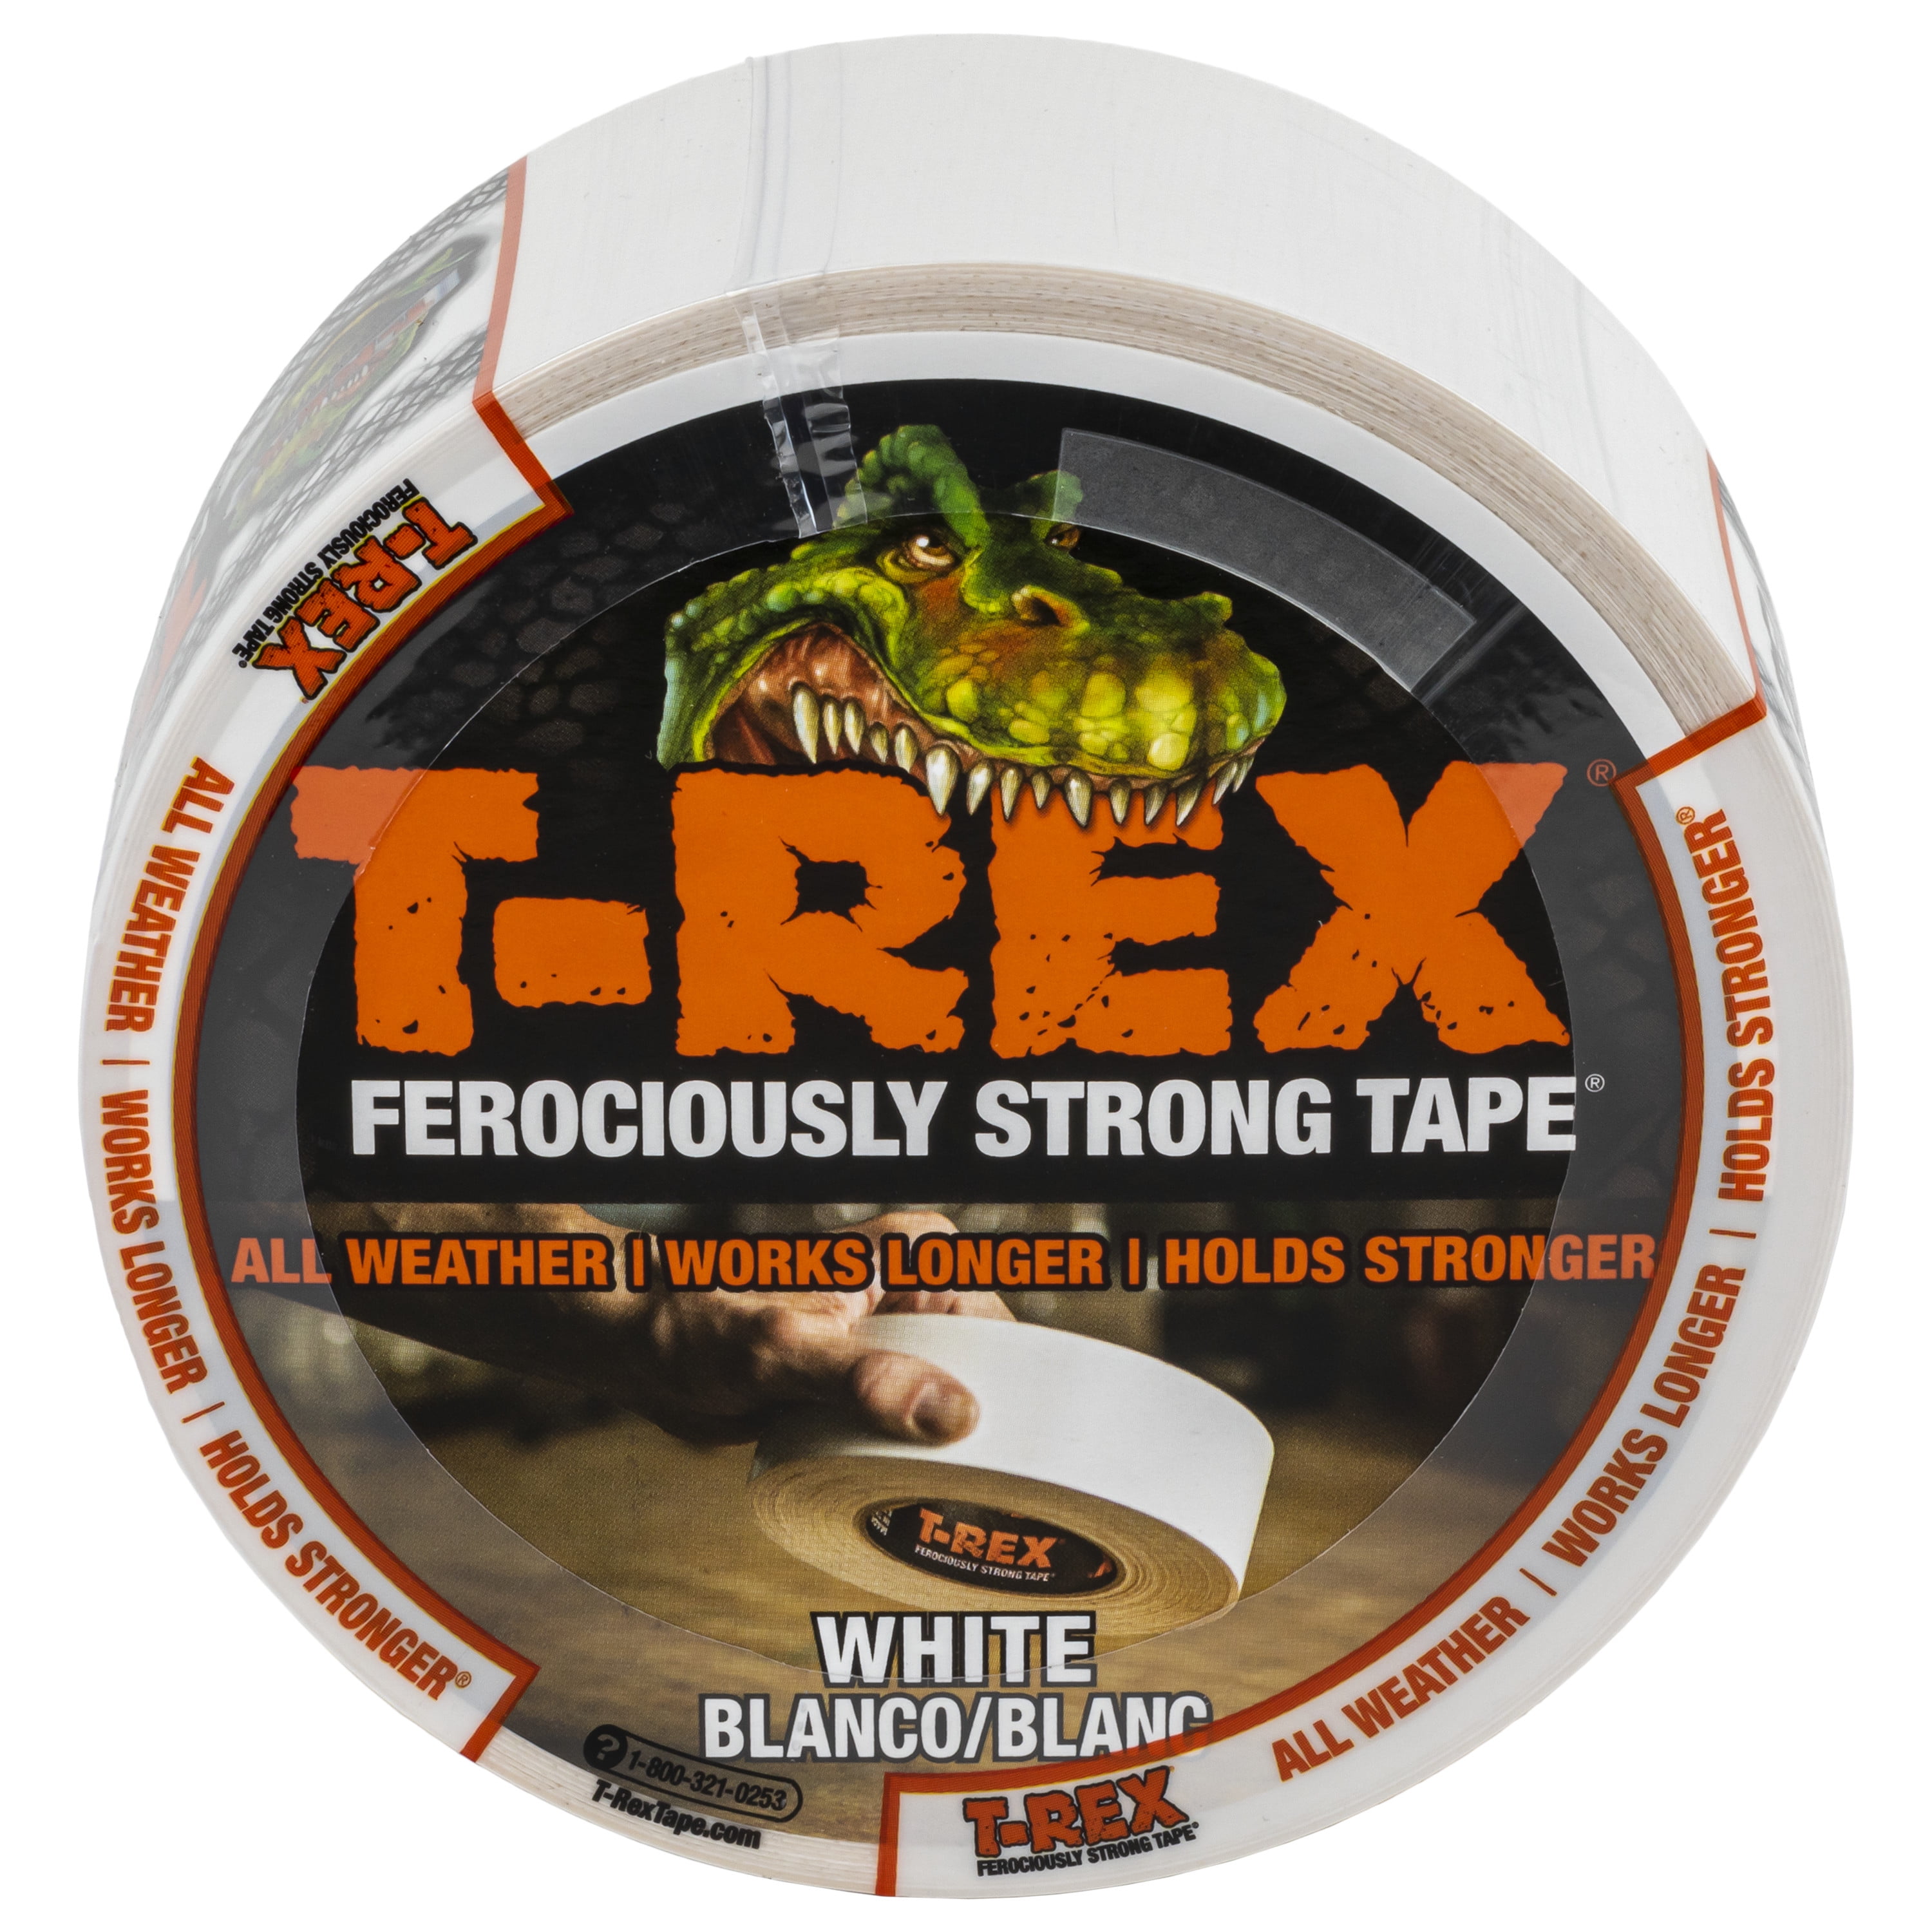  T-REX Ferociously Strong Tape, Duct Tape with UV Resistant &  Waterproof Backing for Wood Brick Concrete and More, 30 yd. x 1.88, White,  1-Roll (241534) : Industrial & Scientific